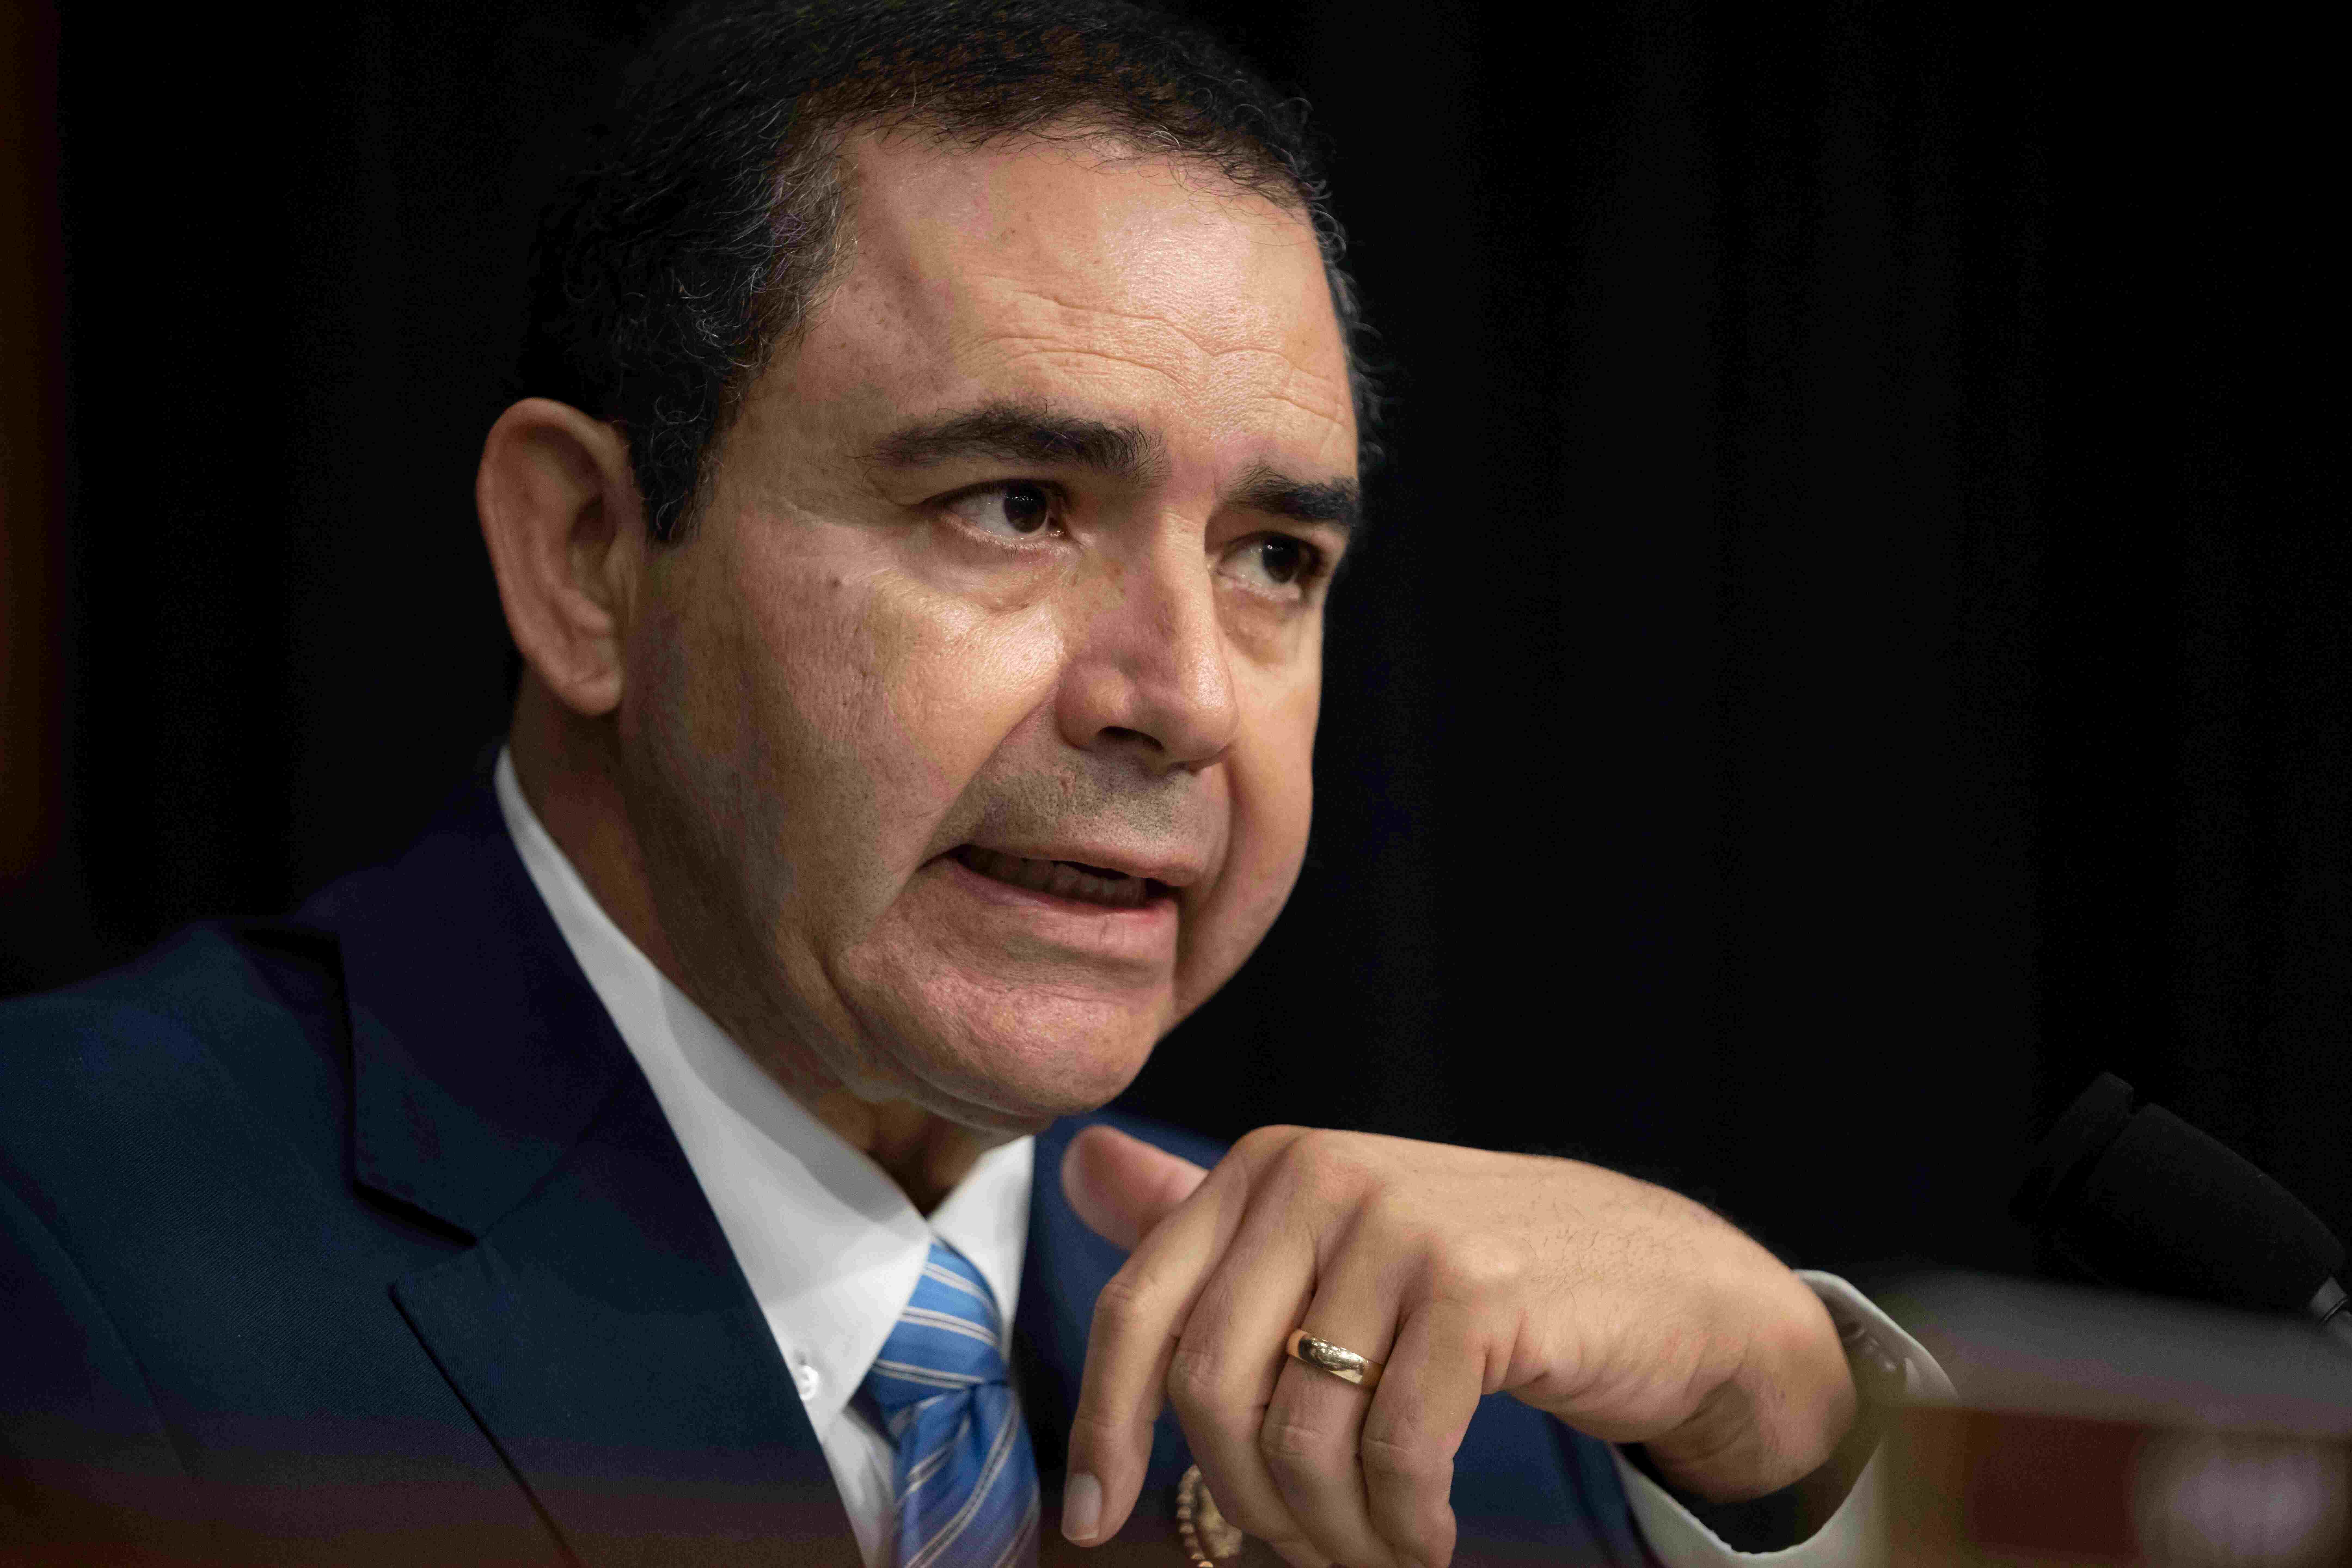 Rep. Henry Cuellar (D-TX) and his wife were charged with bribery and corruption for accepting $600,000 from the government of Azerbaijan and a bank in Mexico.